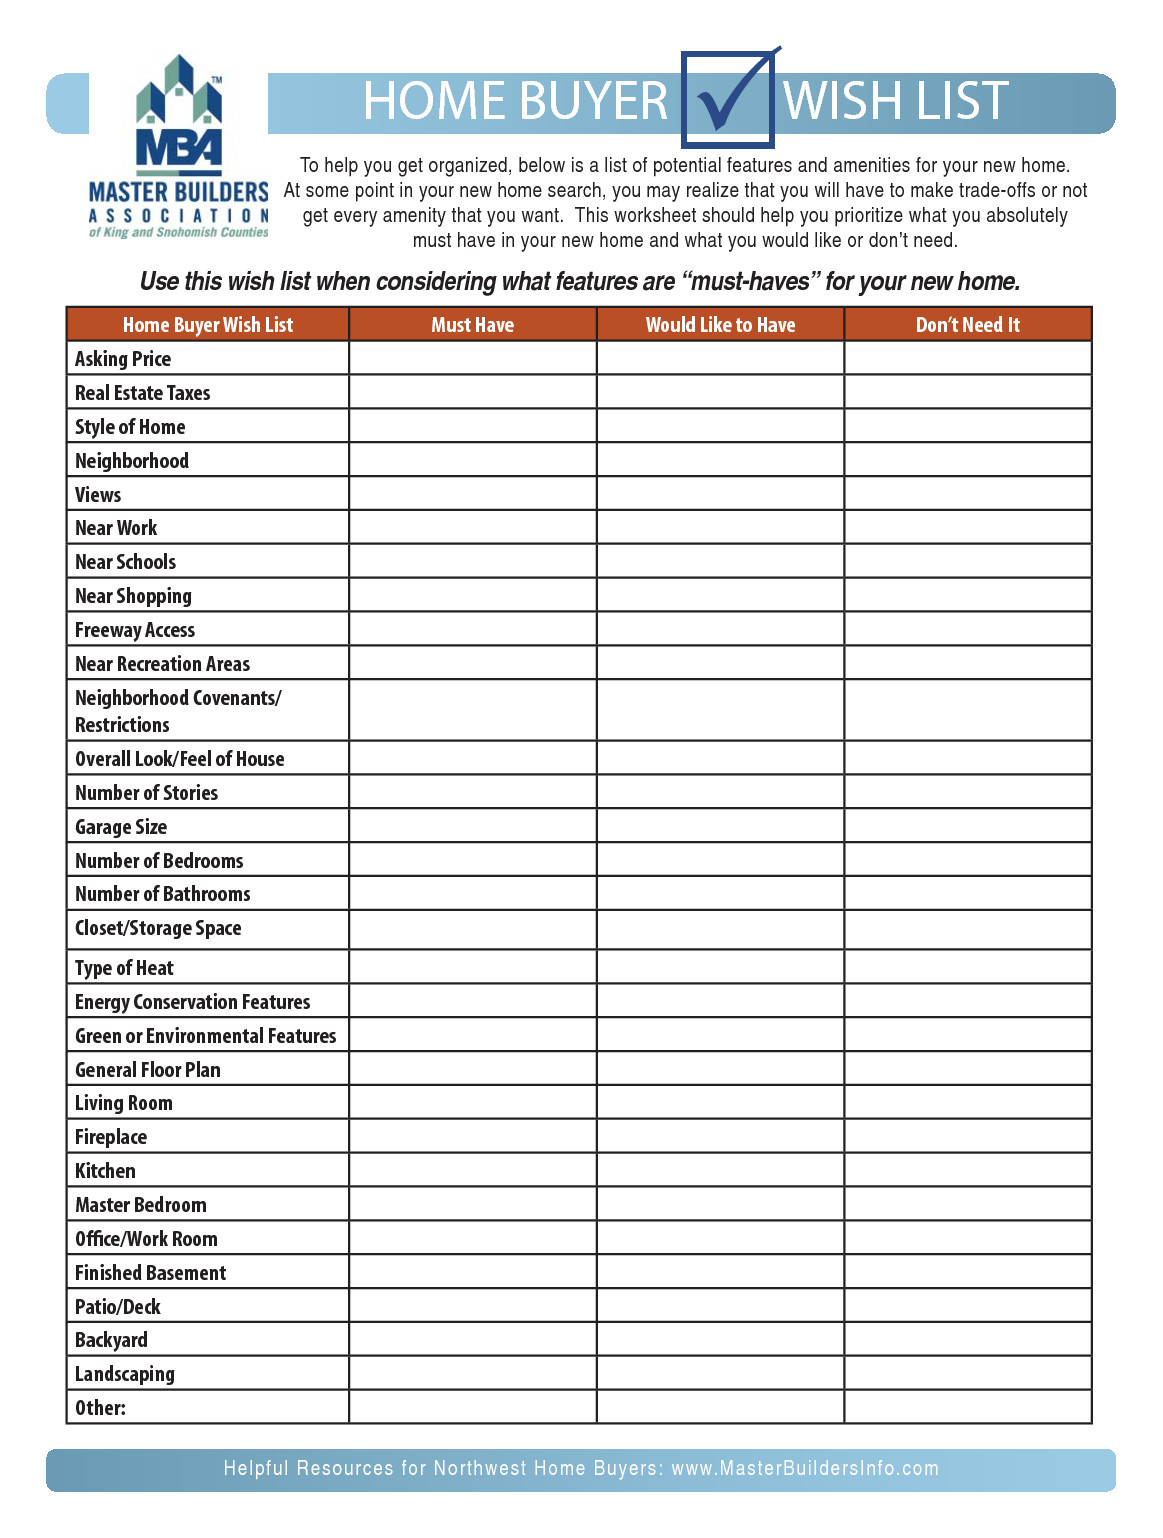 Buying A House Checklist Template Home Buyers Wish List Must Have Would Like to Have Don